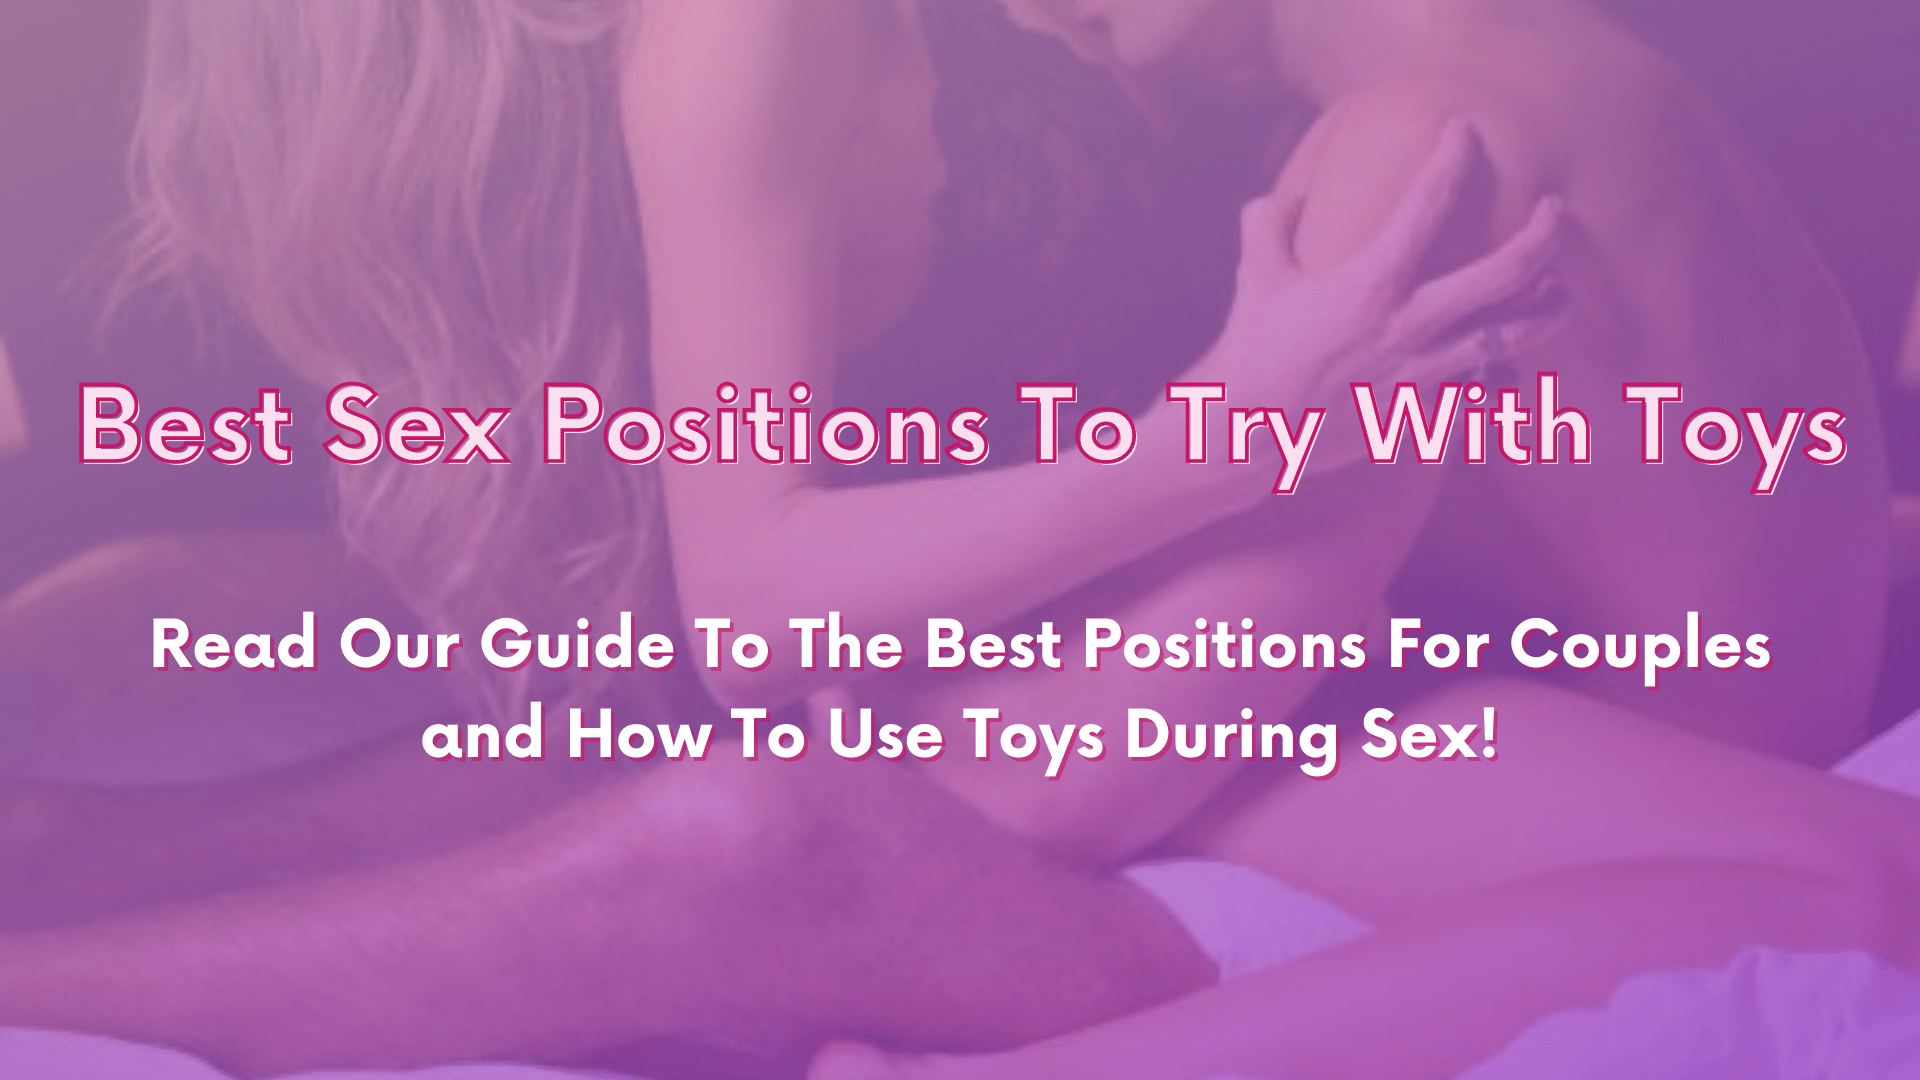 Best Sex Positions To Try With Toys. Read our guide to the best positions for couples and how to use toys during sex